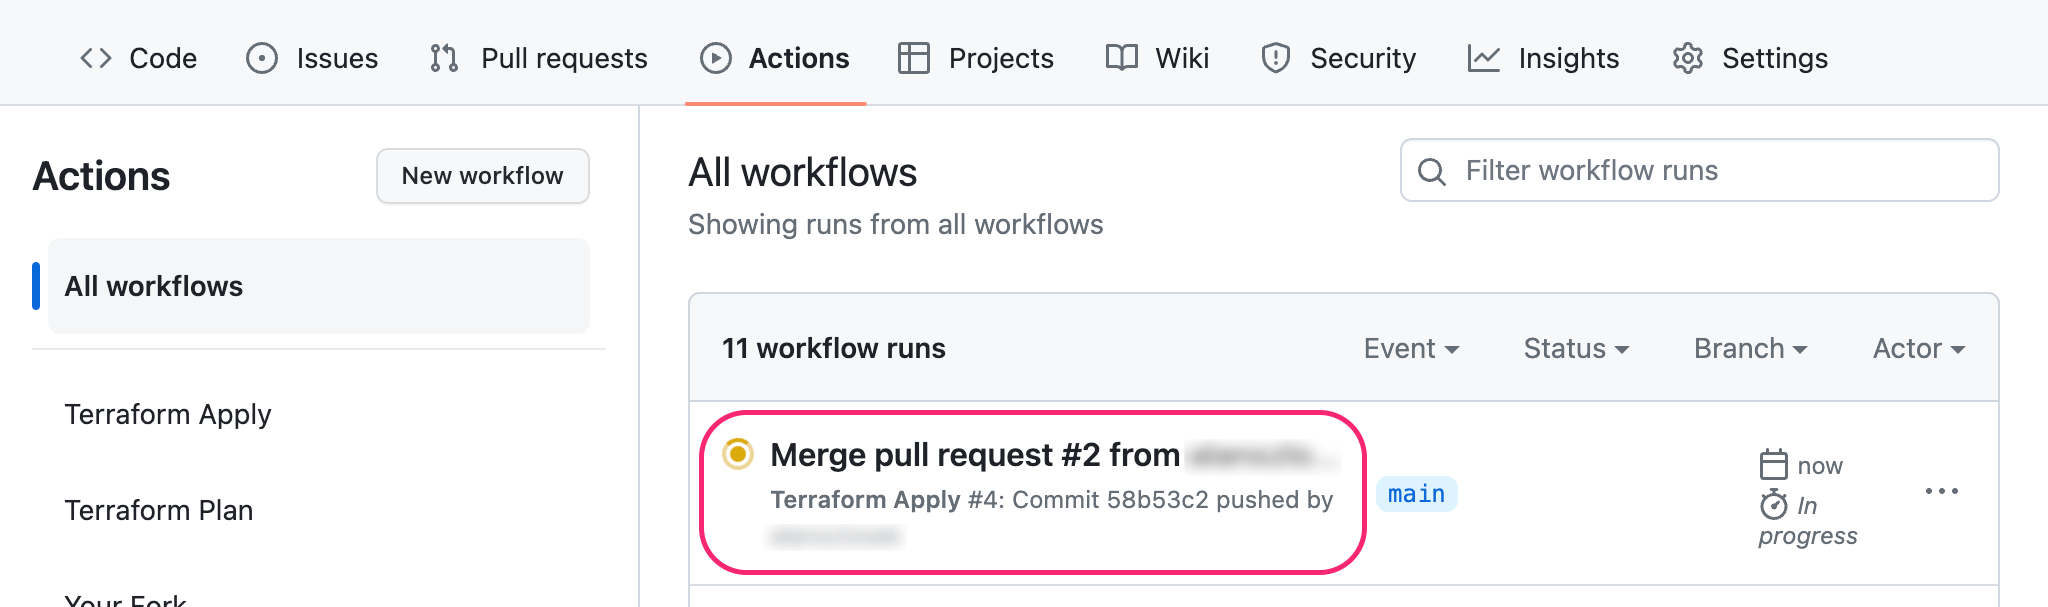 Merged pull request on Actions page of GitHub repository.